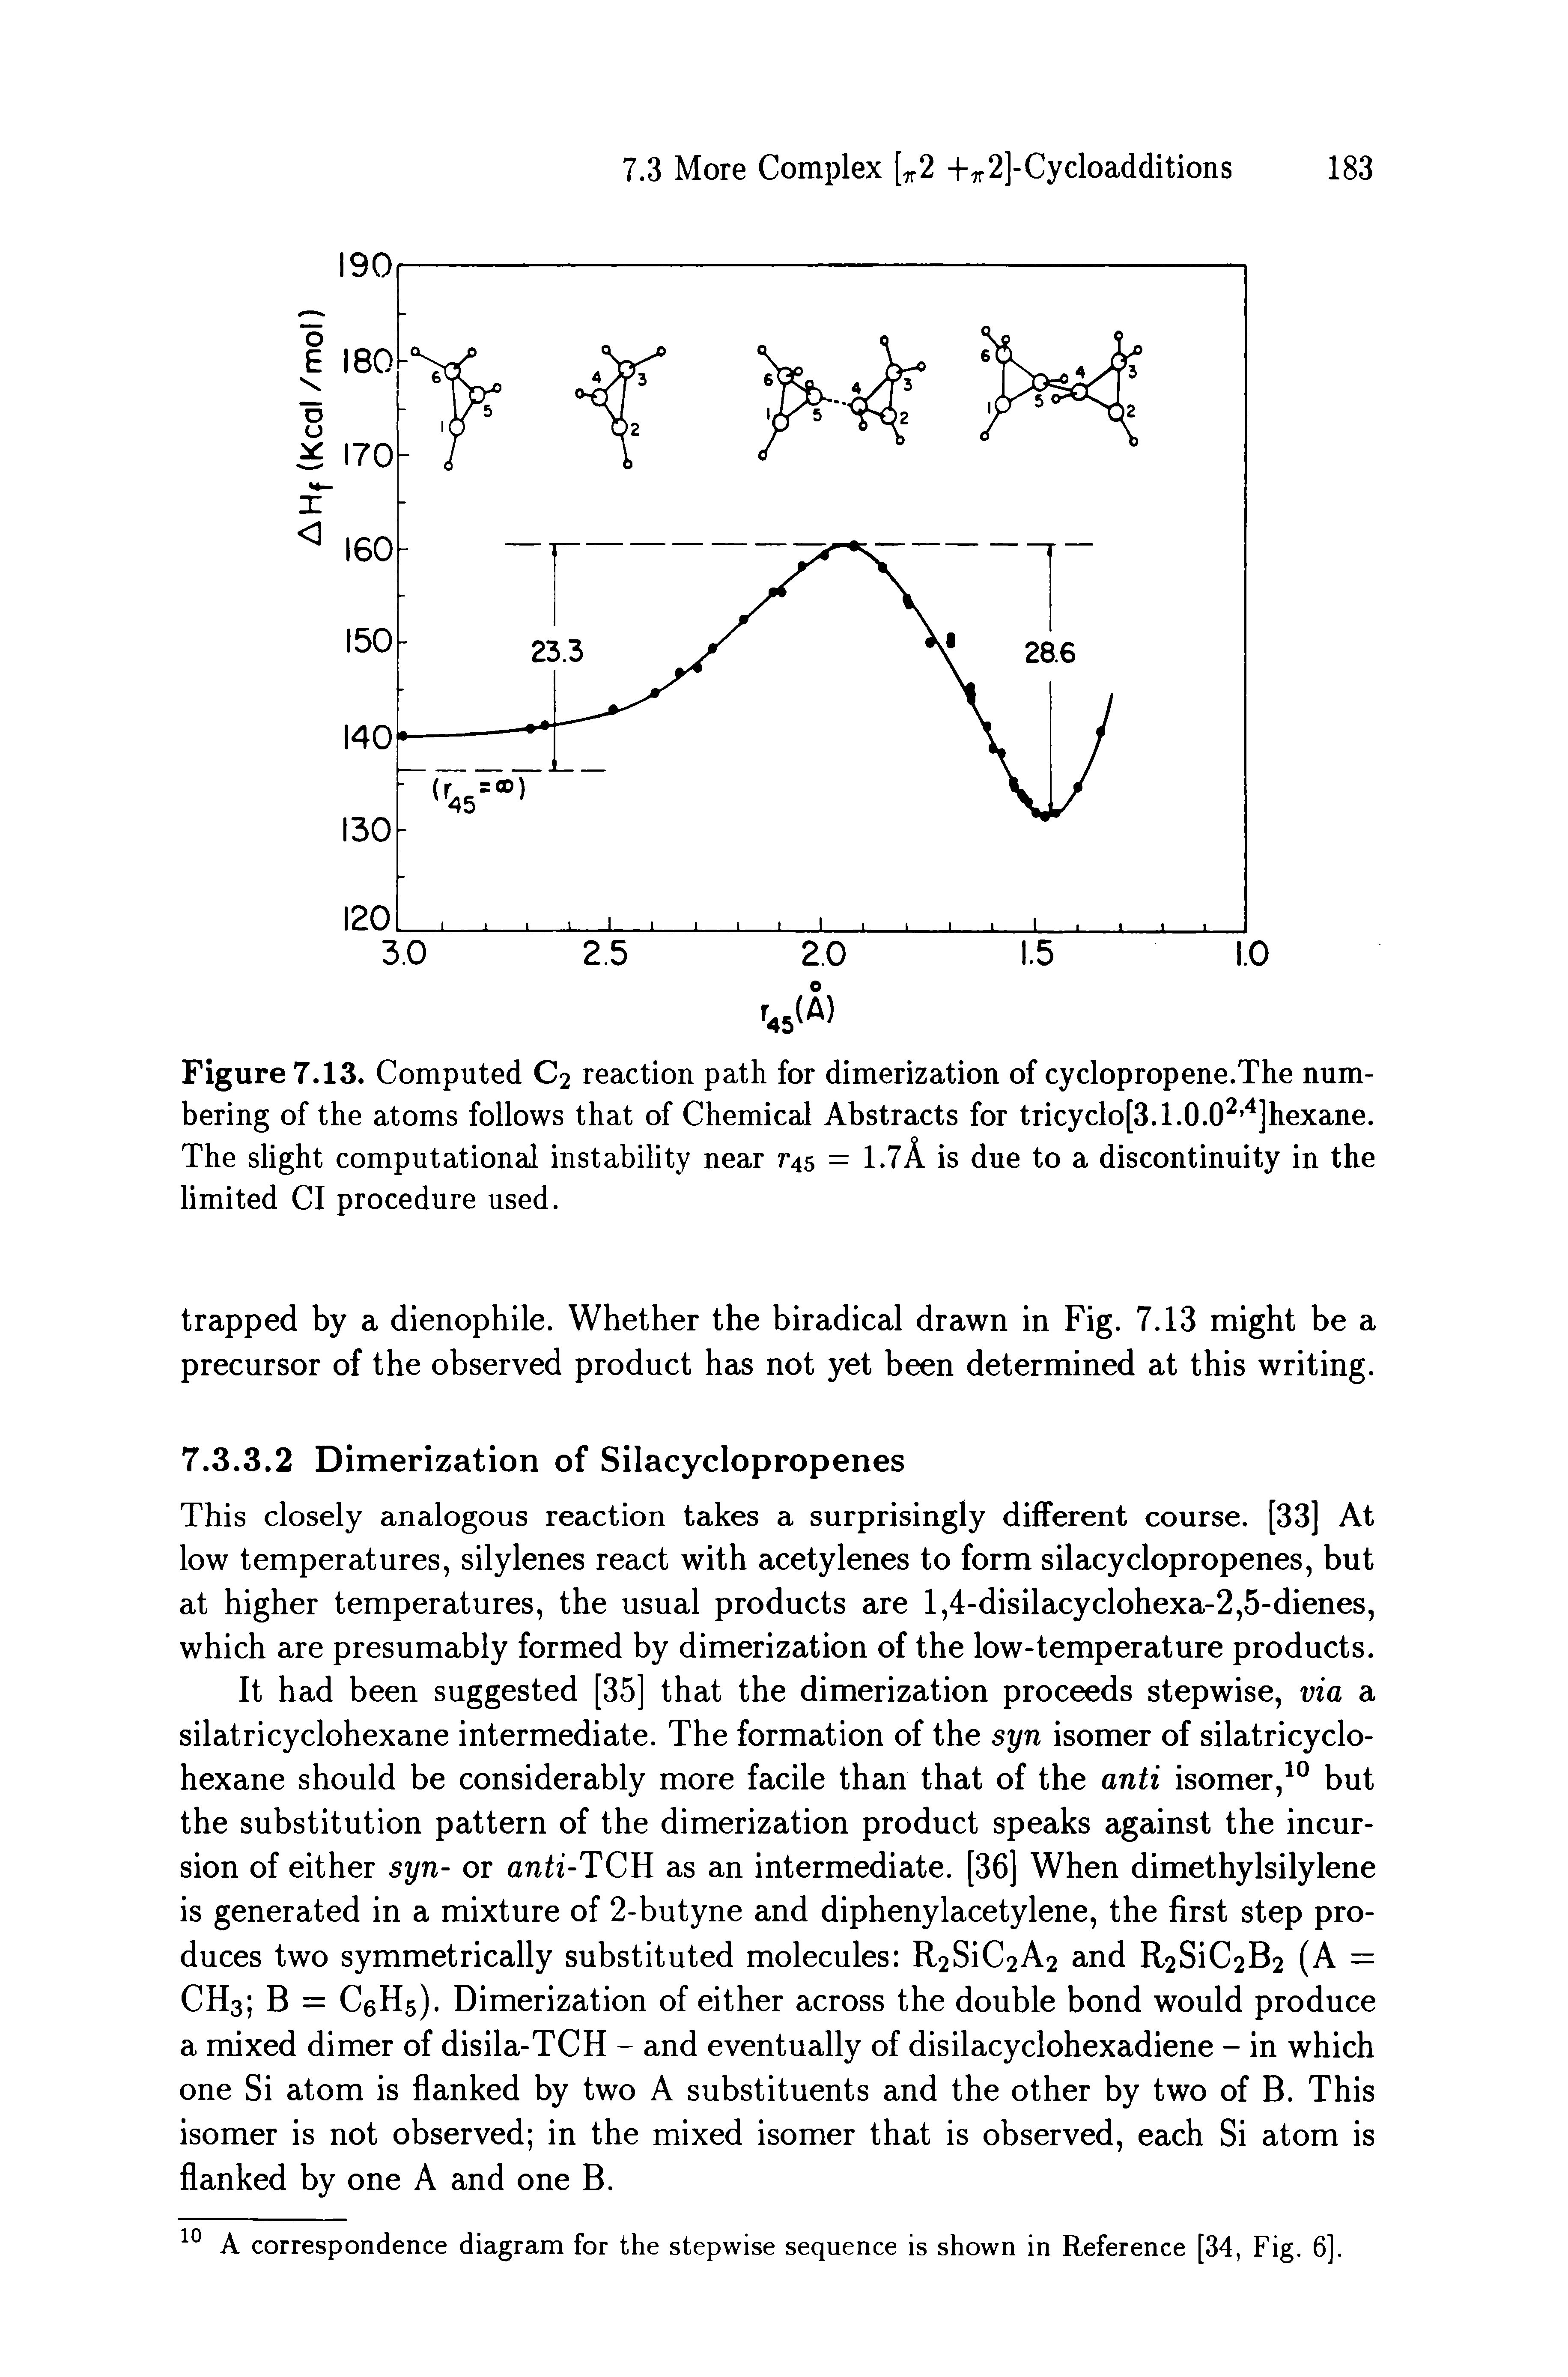 Figure 7.13. Computed C2 reaction path for dimerization of cyclopropene.The numbering of the atoms follows that of Chemical Abstracts for tricyclo[3.1.0.0 ]hexane. The slight computational instability near r4s = 1.7A is due to a discontinuity in the limited Cl procedure used.